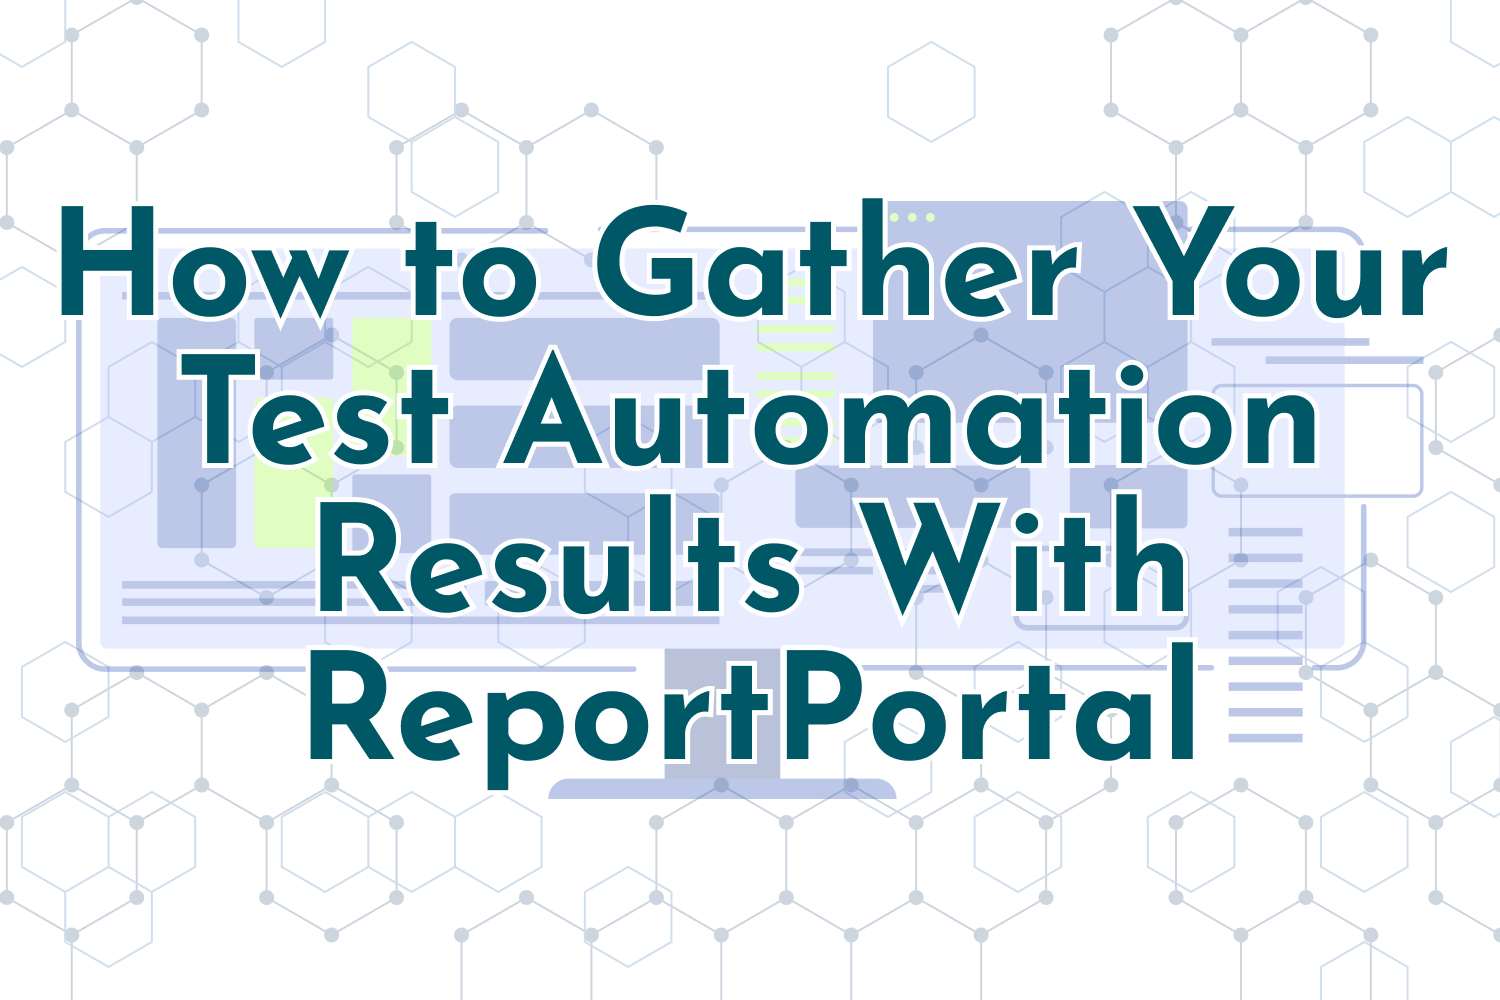 How to Gather Your Test Automation Results With ReportPortal